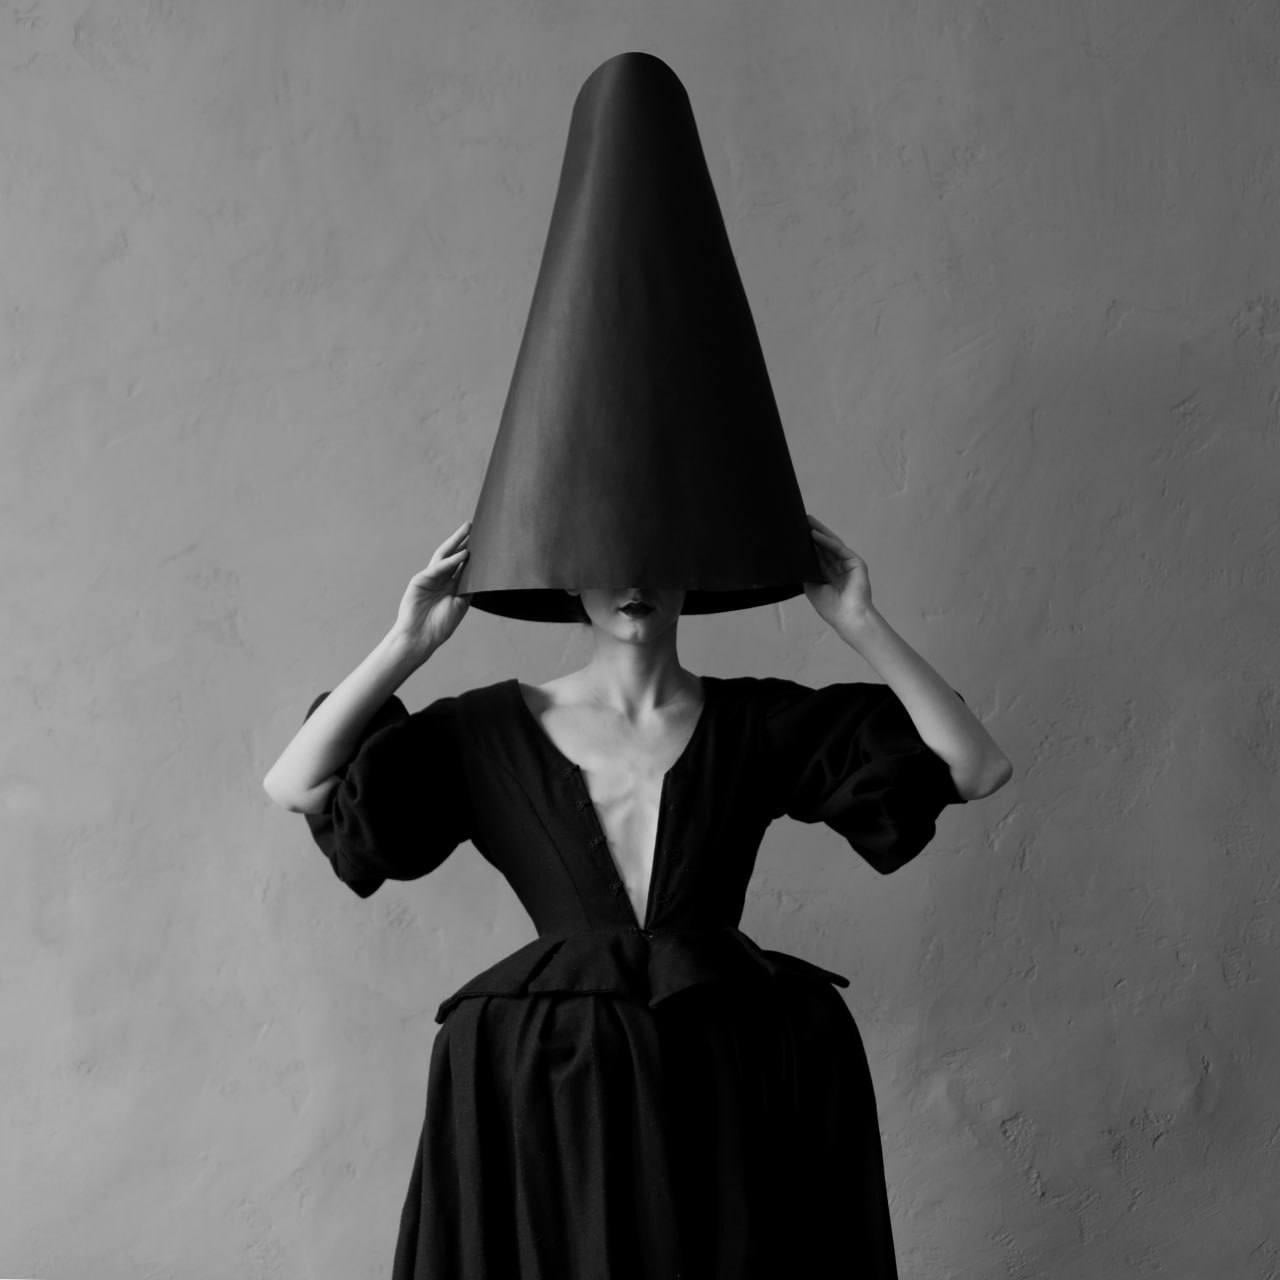 "Invisibility Hat" Photography 39" x 39" in Edition 2/3 by Olha Stepanian

Printed on Epson Professional Paper
Signed and numbered by the artist 

Not framed. Ships in a tube. 

Available sizes:			
Edition of 24			16" x 16" inch
Edition of 15			24"